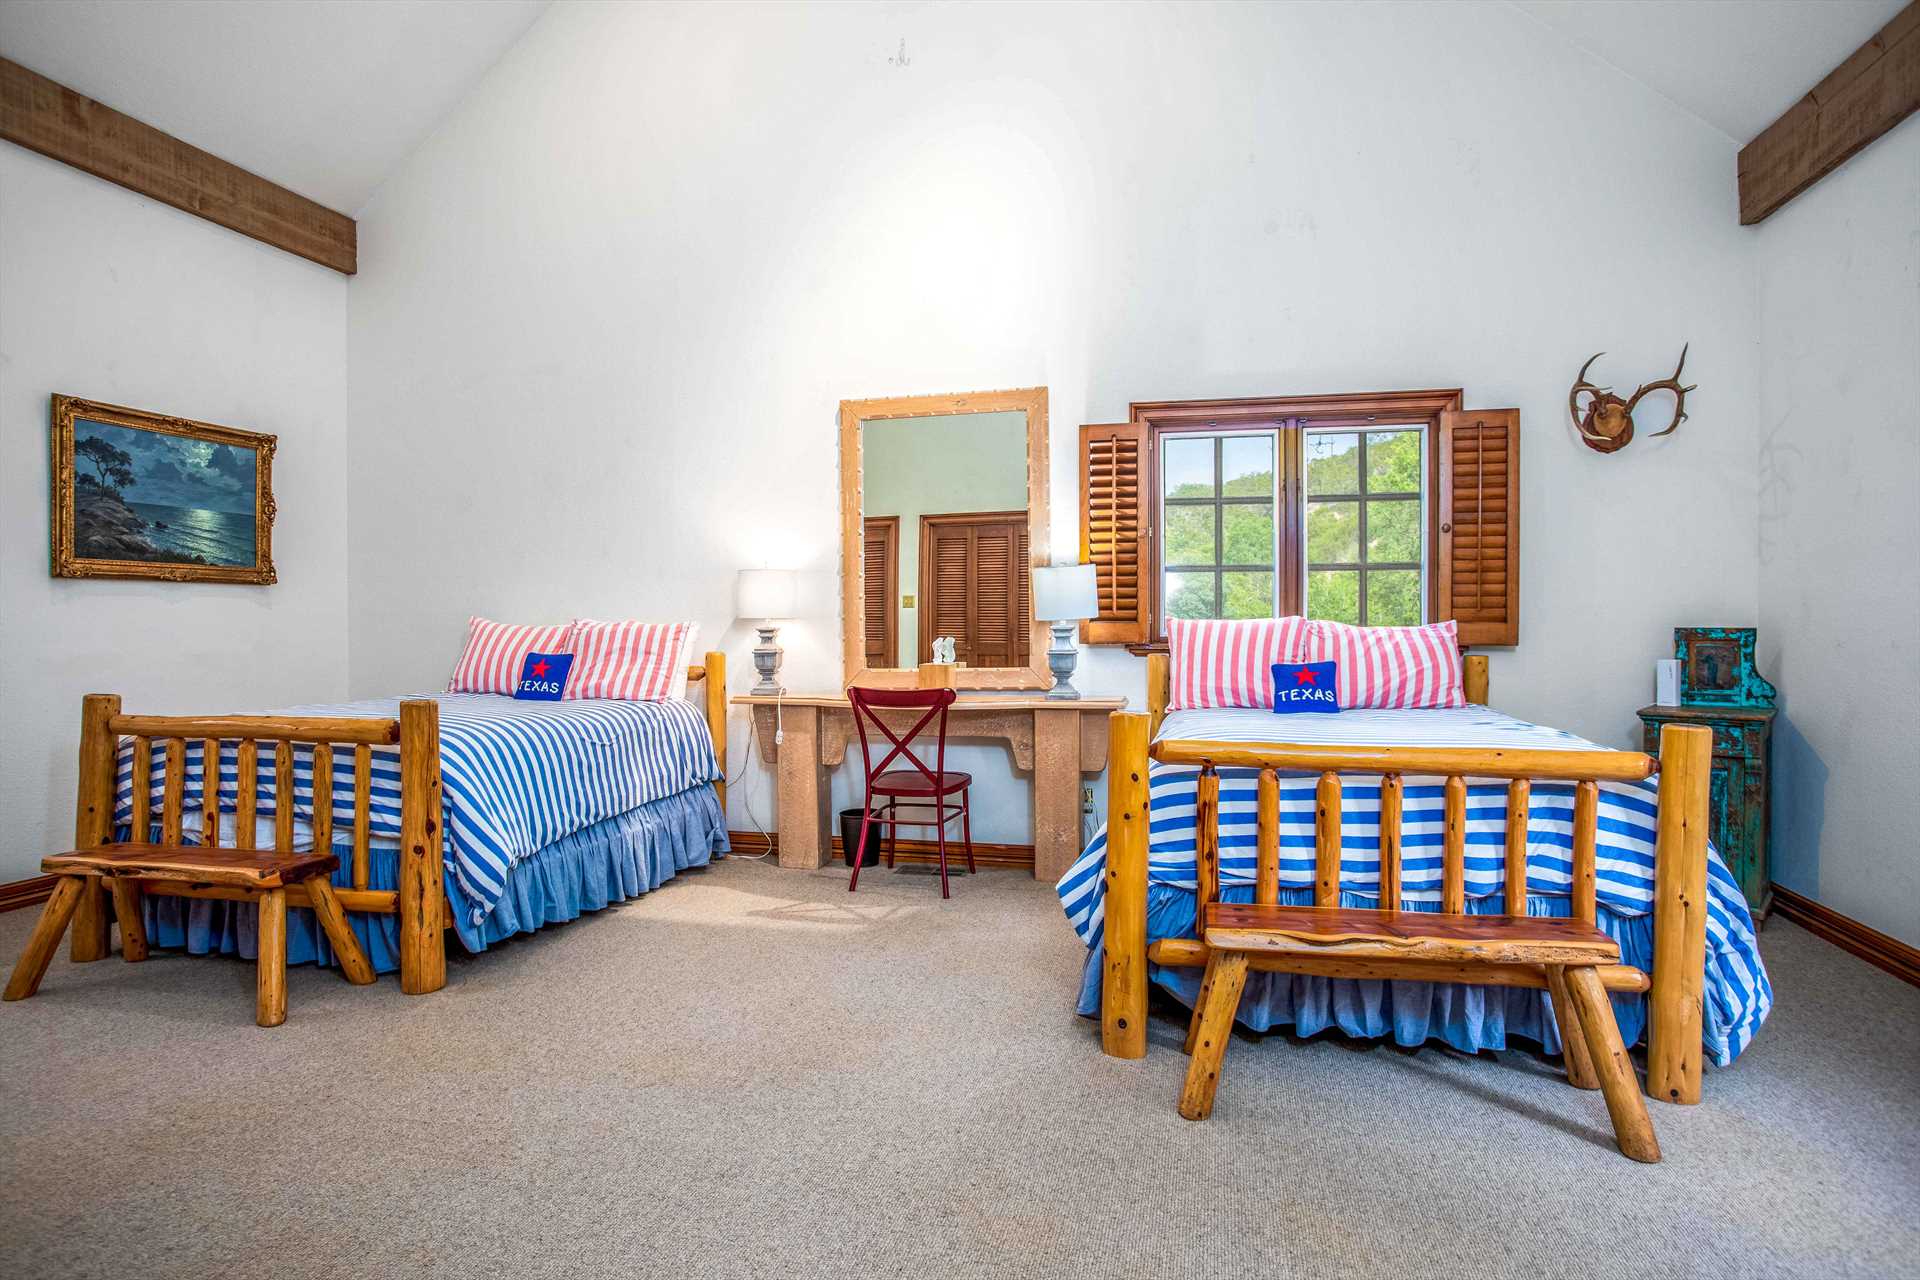                                                 Two queen-sized beds can be found in the Homestead's second bedroom, and roll-away beds are available for an additional two people, if requested.